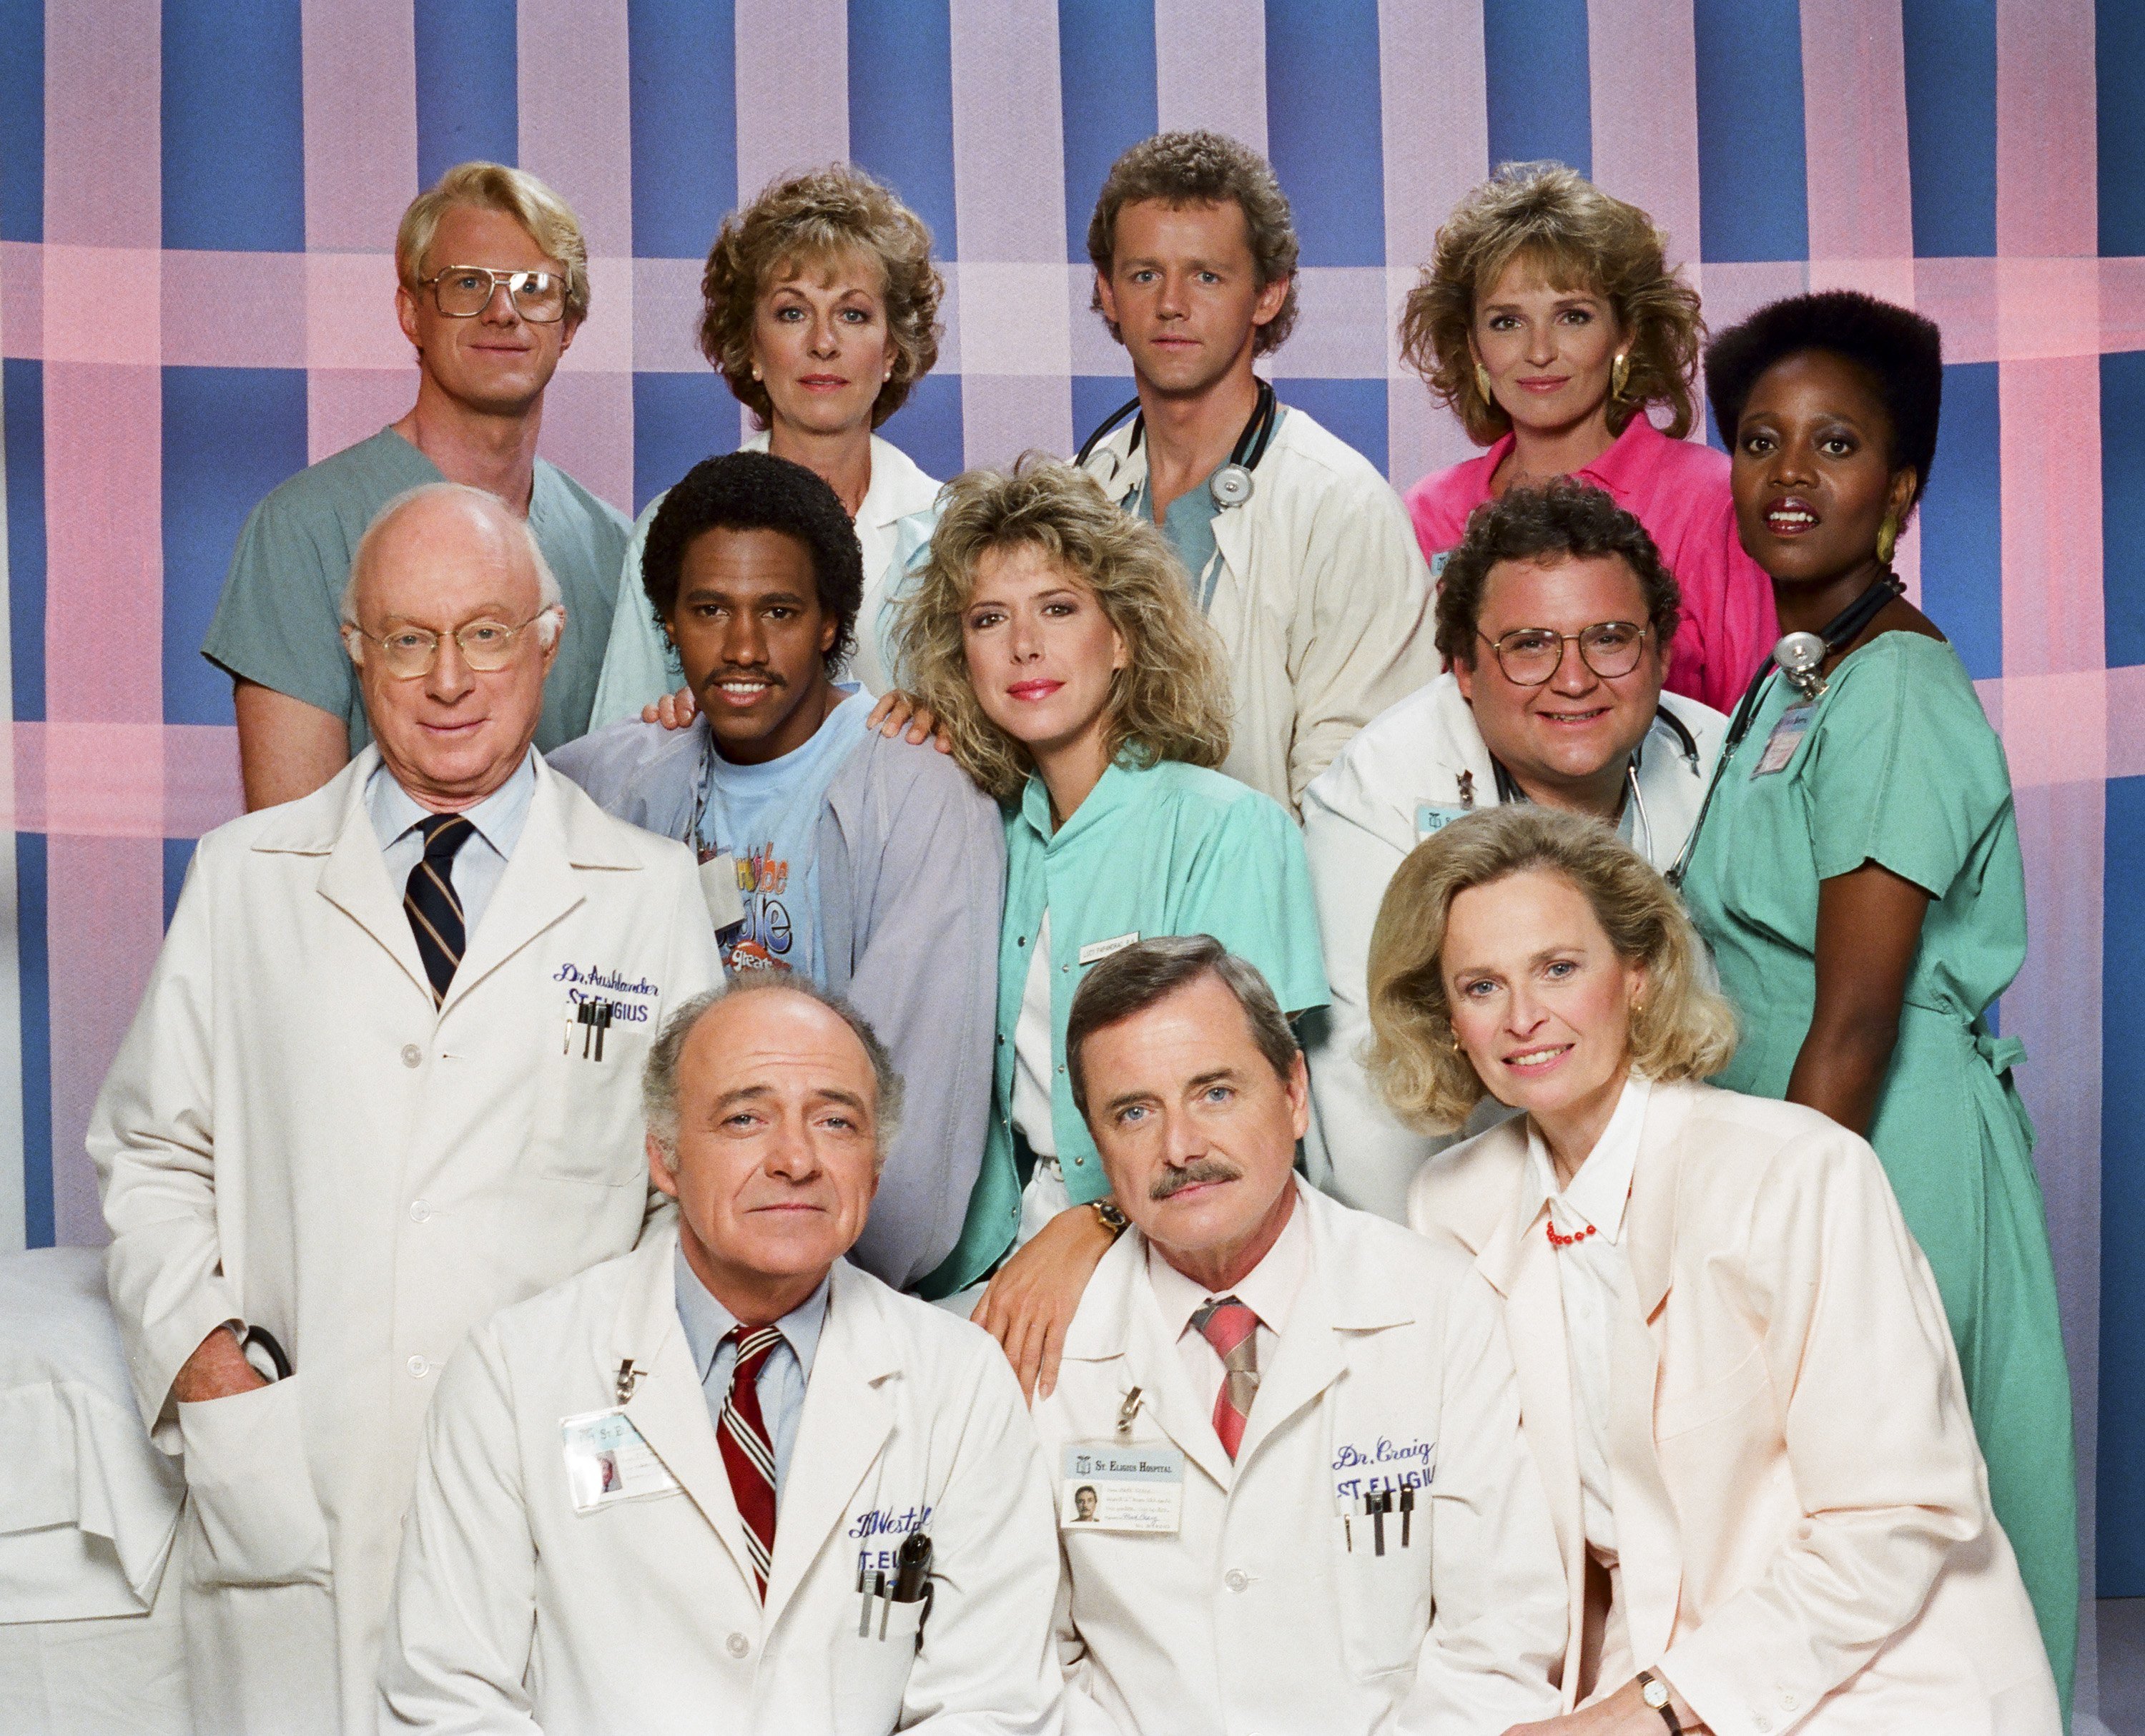 The cast of the medical series, "St. Elsewhere" | Source: Getty Images